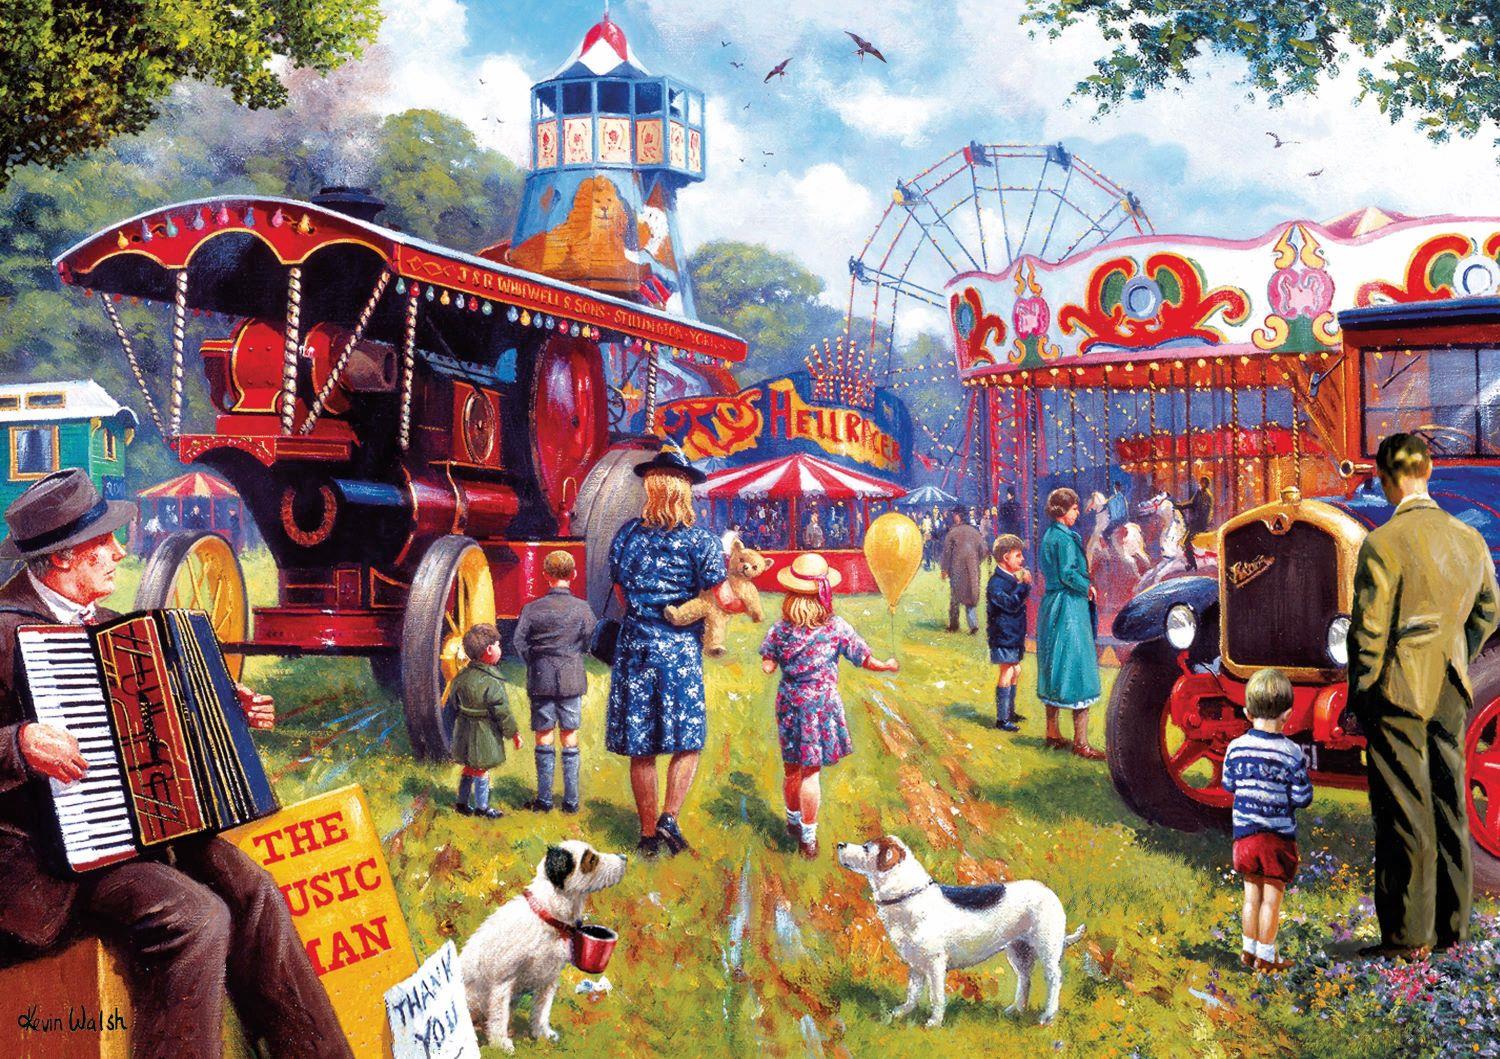 A Day At The Fair, Kevin Walsh Jigsaw Puzzle (1000 Pieces)